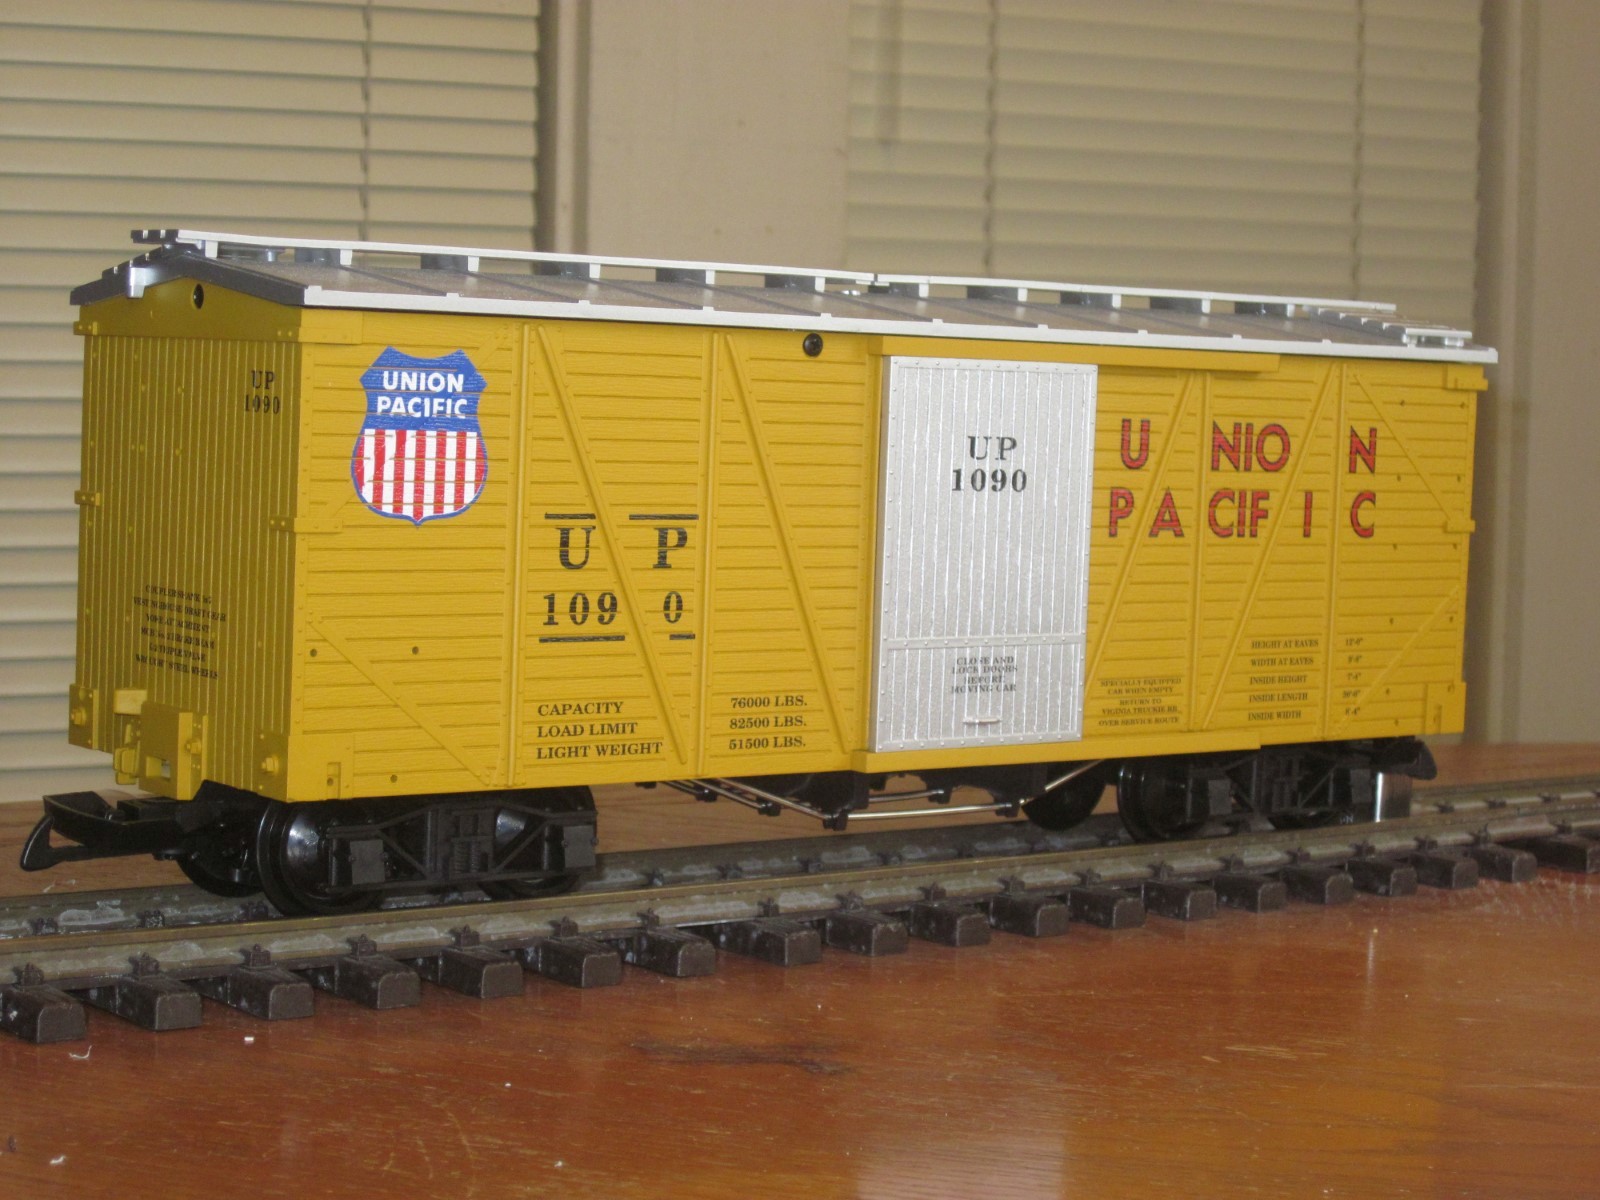 R1454A Union Pacific #UP 1090